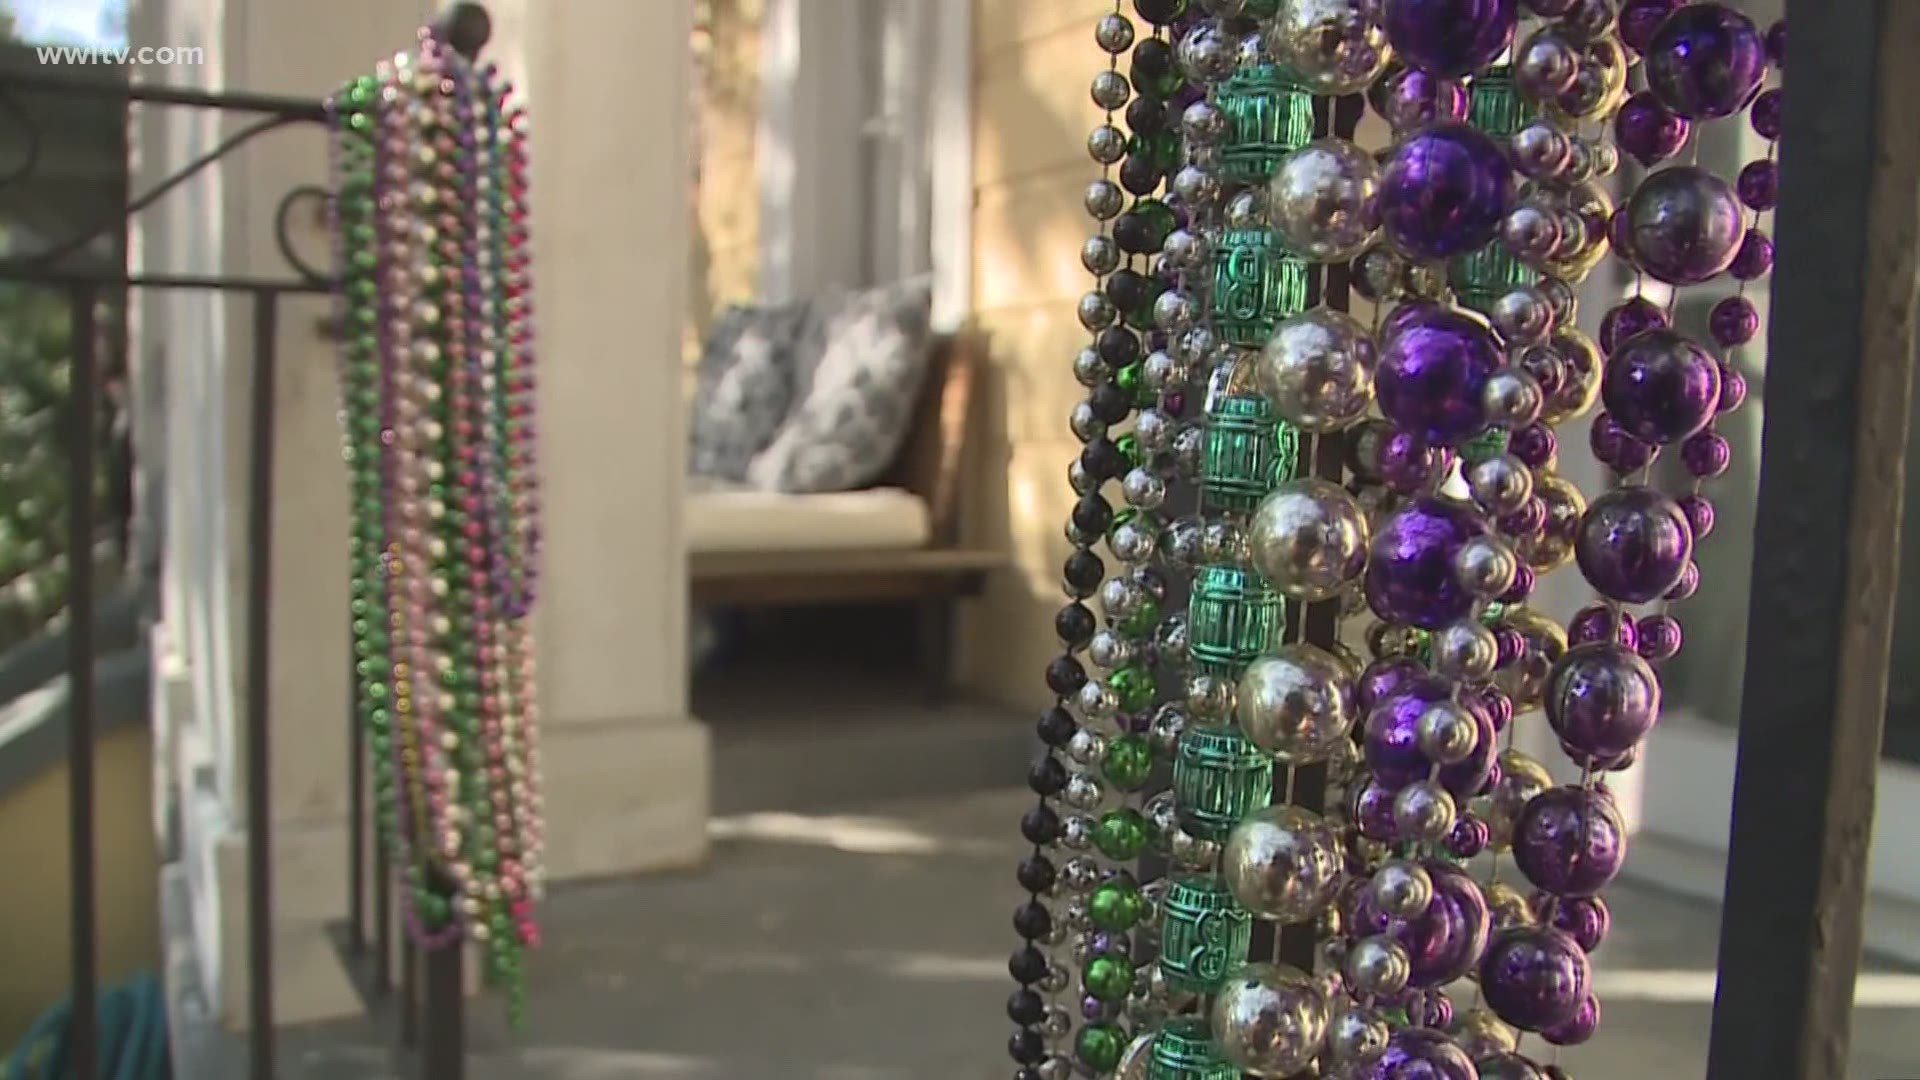 A new Krewe has gained more than 1,500 members with the hopes Carnival will still be something special